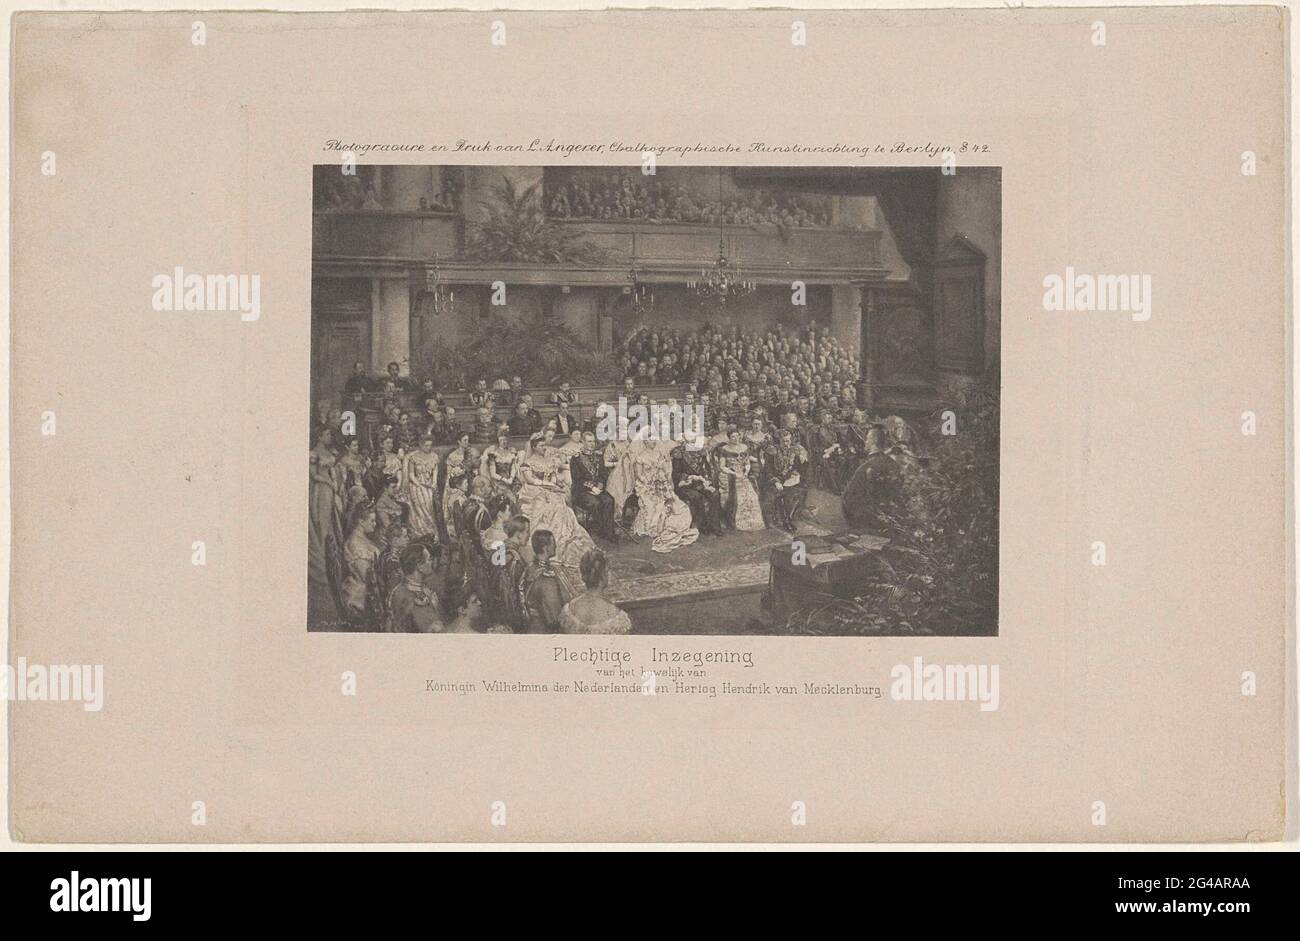 Blessing the marriage of Queen Wilhelmina and Prince Hendrik, 1901; Solemn blessing of the marriage of Queen Wilhelmina der Nederlanden and Hertog Hendrik van Mecklenburg. Blessing the marriage of Queen Wilhelmina Hertog Hendrik van Mecklenburg in the Grote Kerk in the Hague on February 7, 1901. To the left of the bride her mother Queen Emma and Hendriks Cousin Grand Duke Frederik French IV from Mecklenburg-Schwerin. To the right of the groom his mother Marie van Schwarzburg-Rudolstadt. The marriage was taken out by the Minister of Justice Pieter Wilhelm Adrianus Cort van der Linden, who perfo Stock Photo